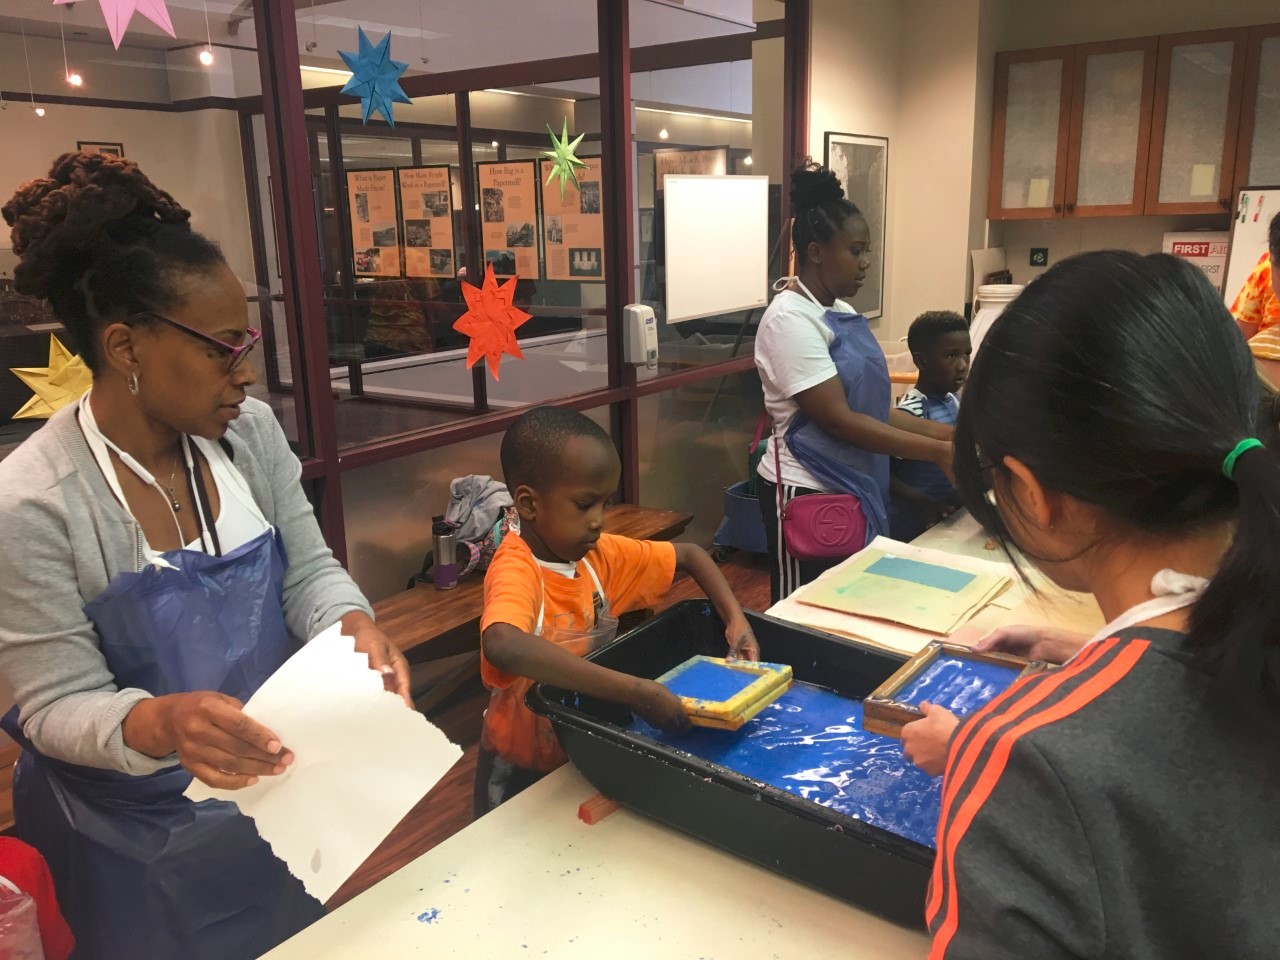 Families pulling sheets of blue paper pulp in the classroom of the Robert C. Williams Museum of Papermaking.